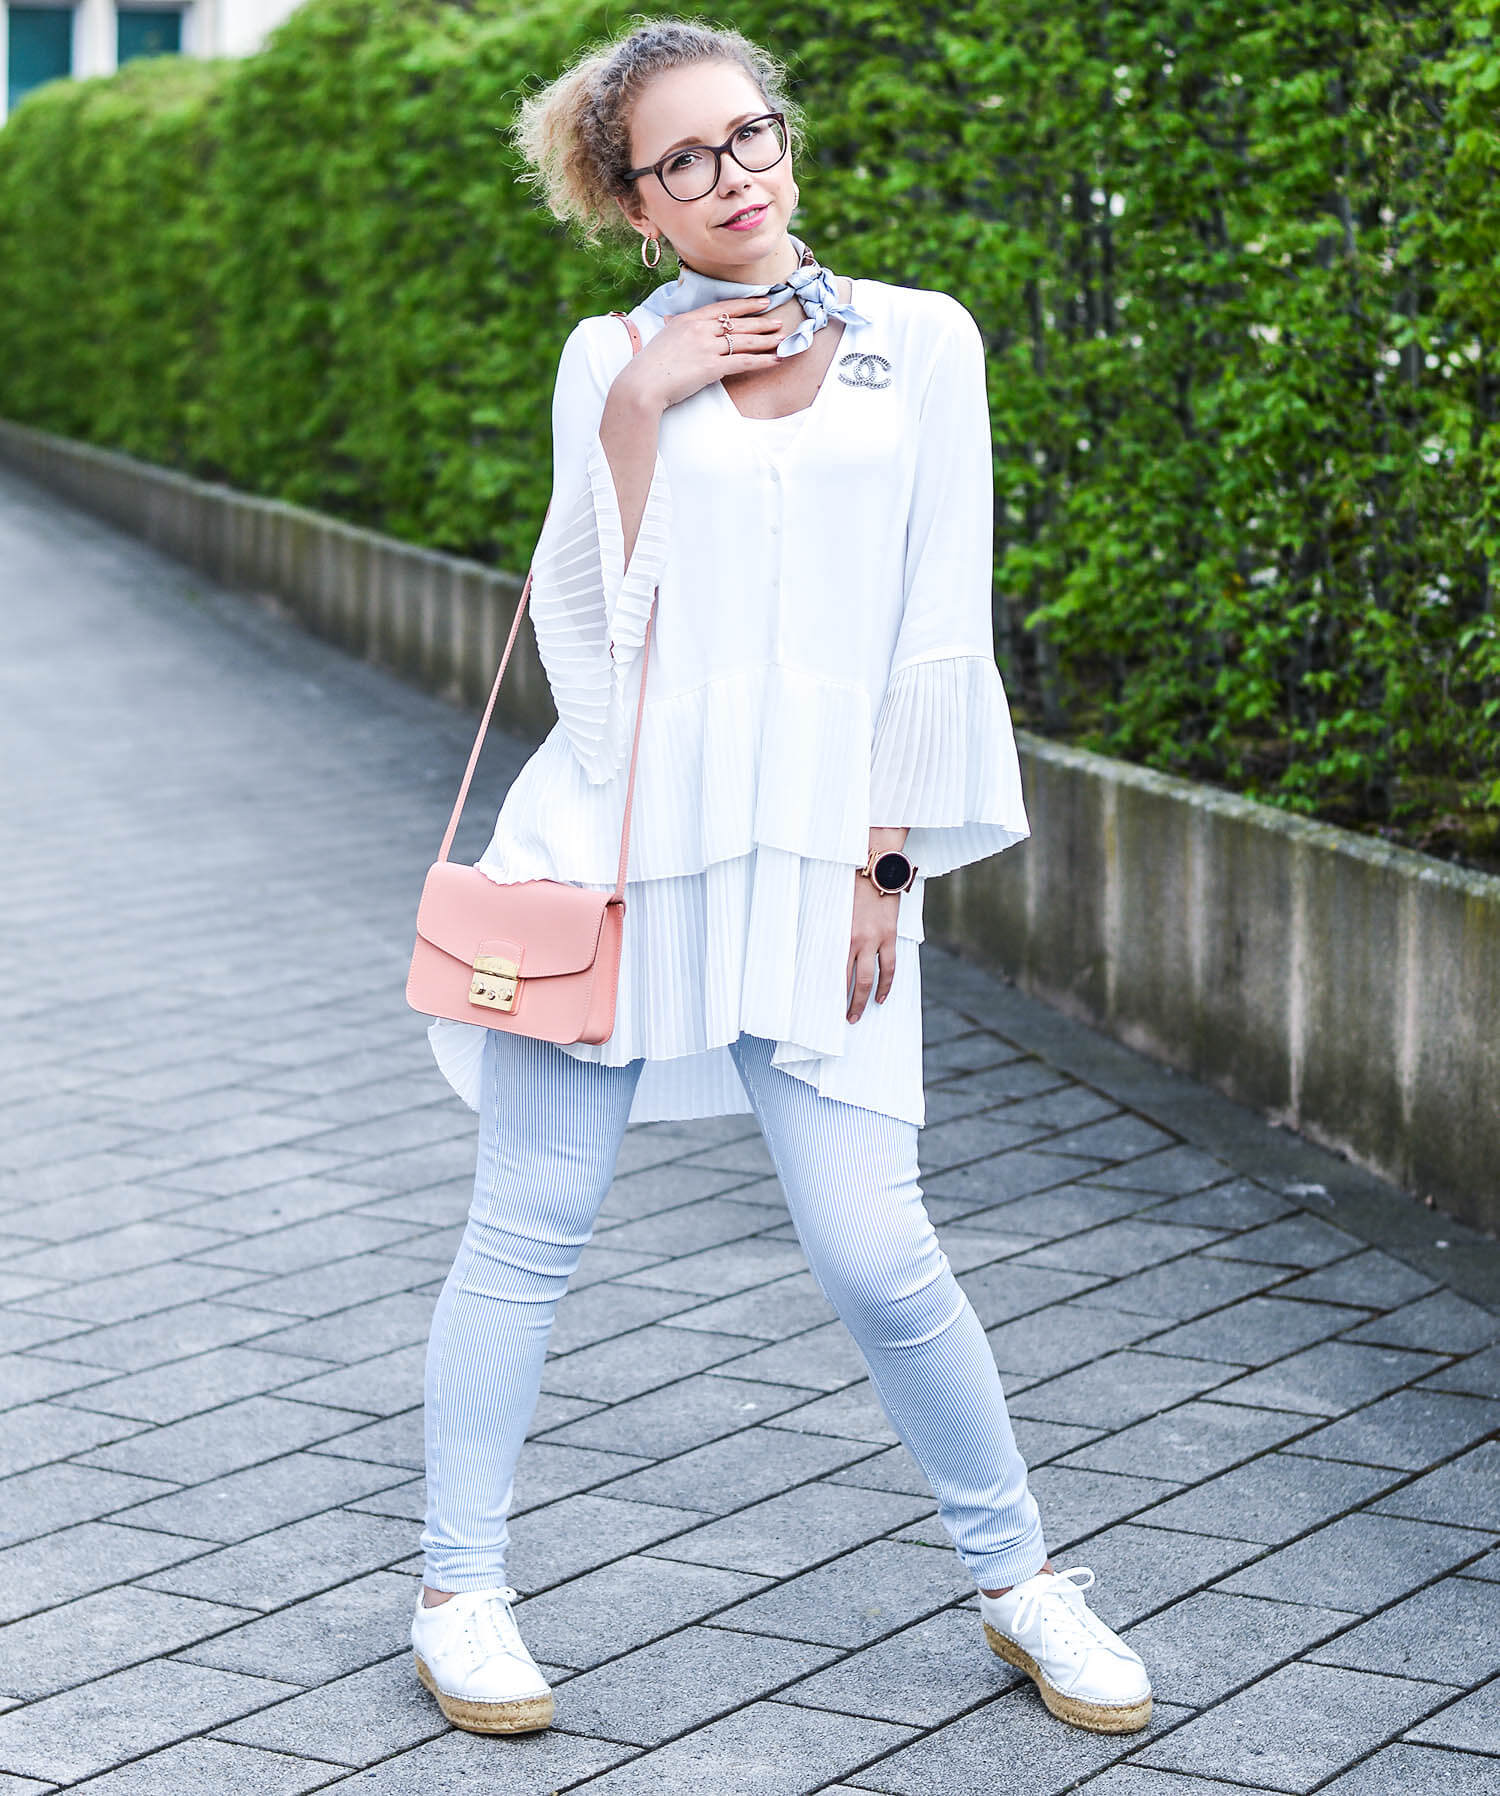 Outfit-Zara-Pleated-Blouse-Furla-Bag-and-Steve-Madden-platform-Sneakers-kationette-fashionblogger-nrw